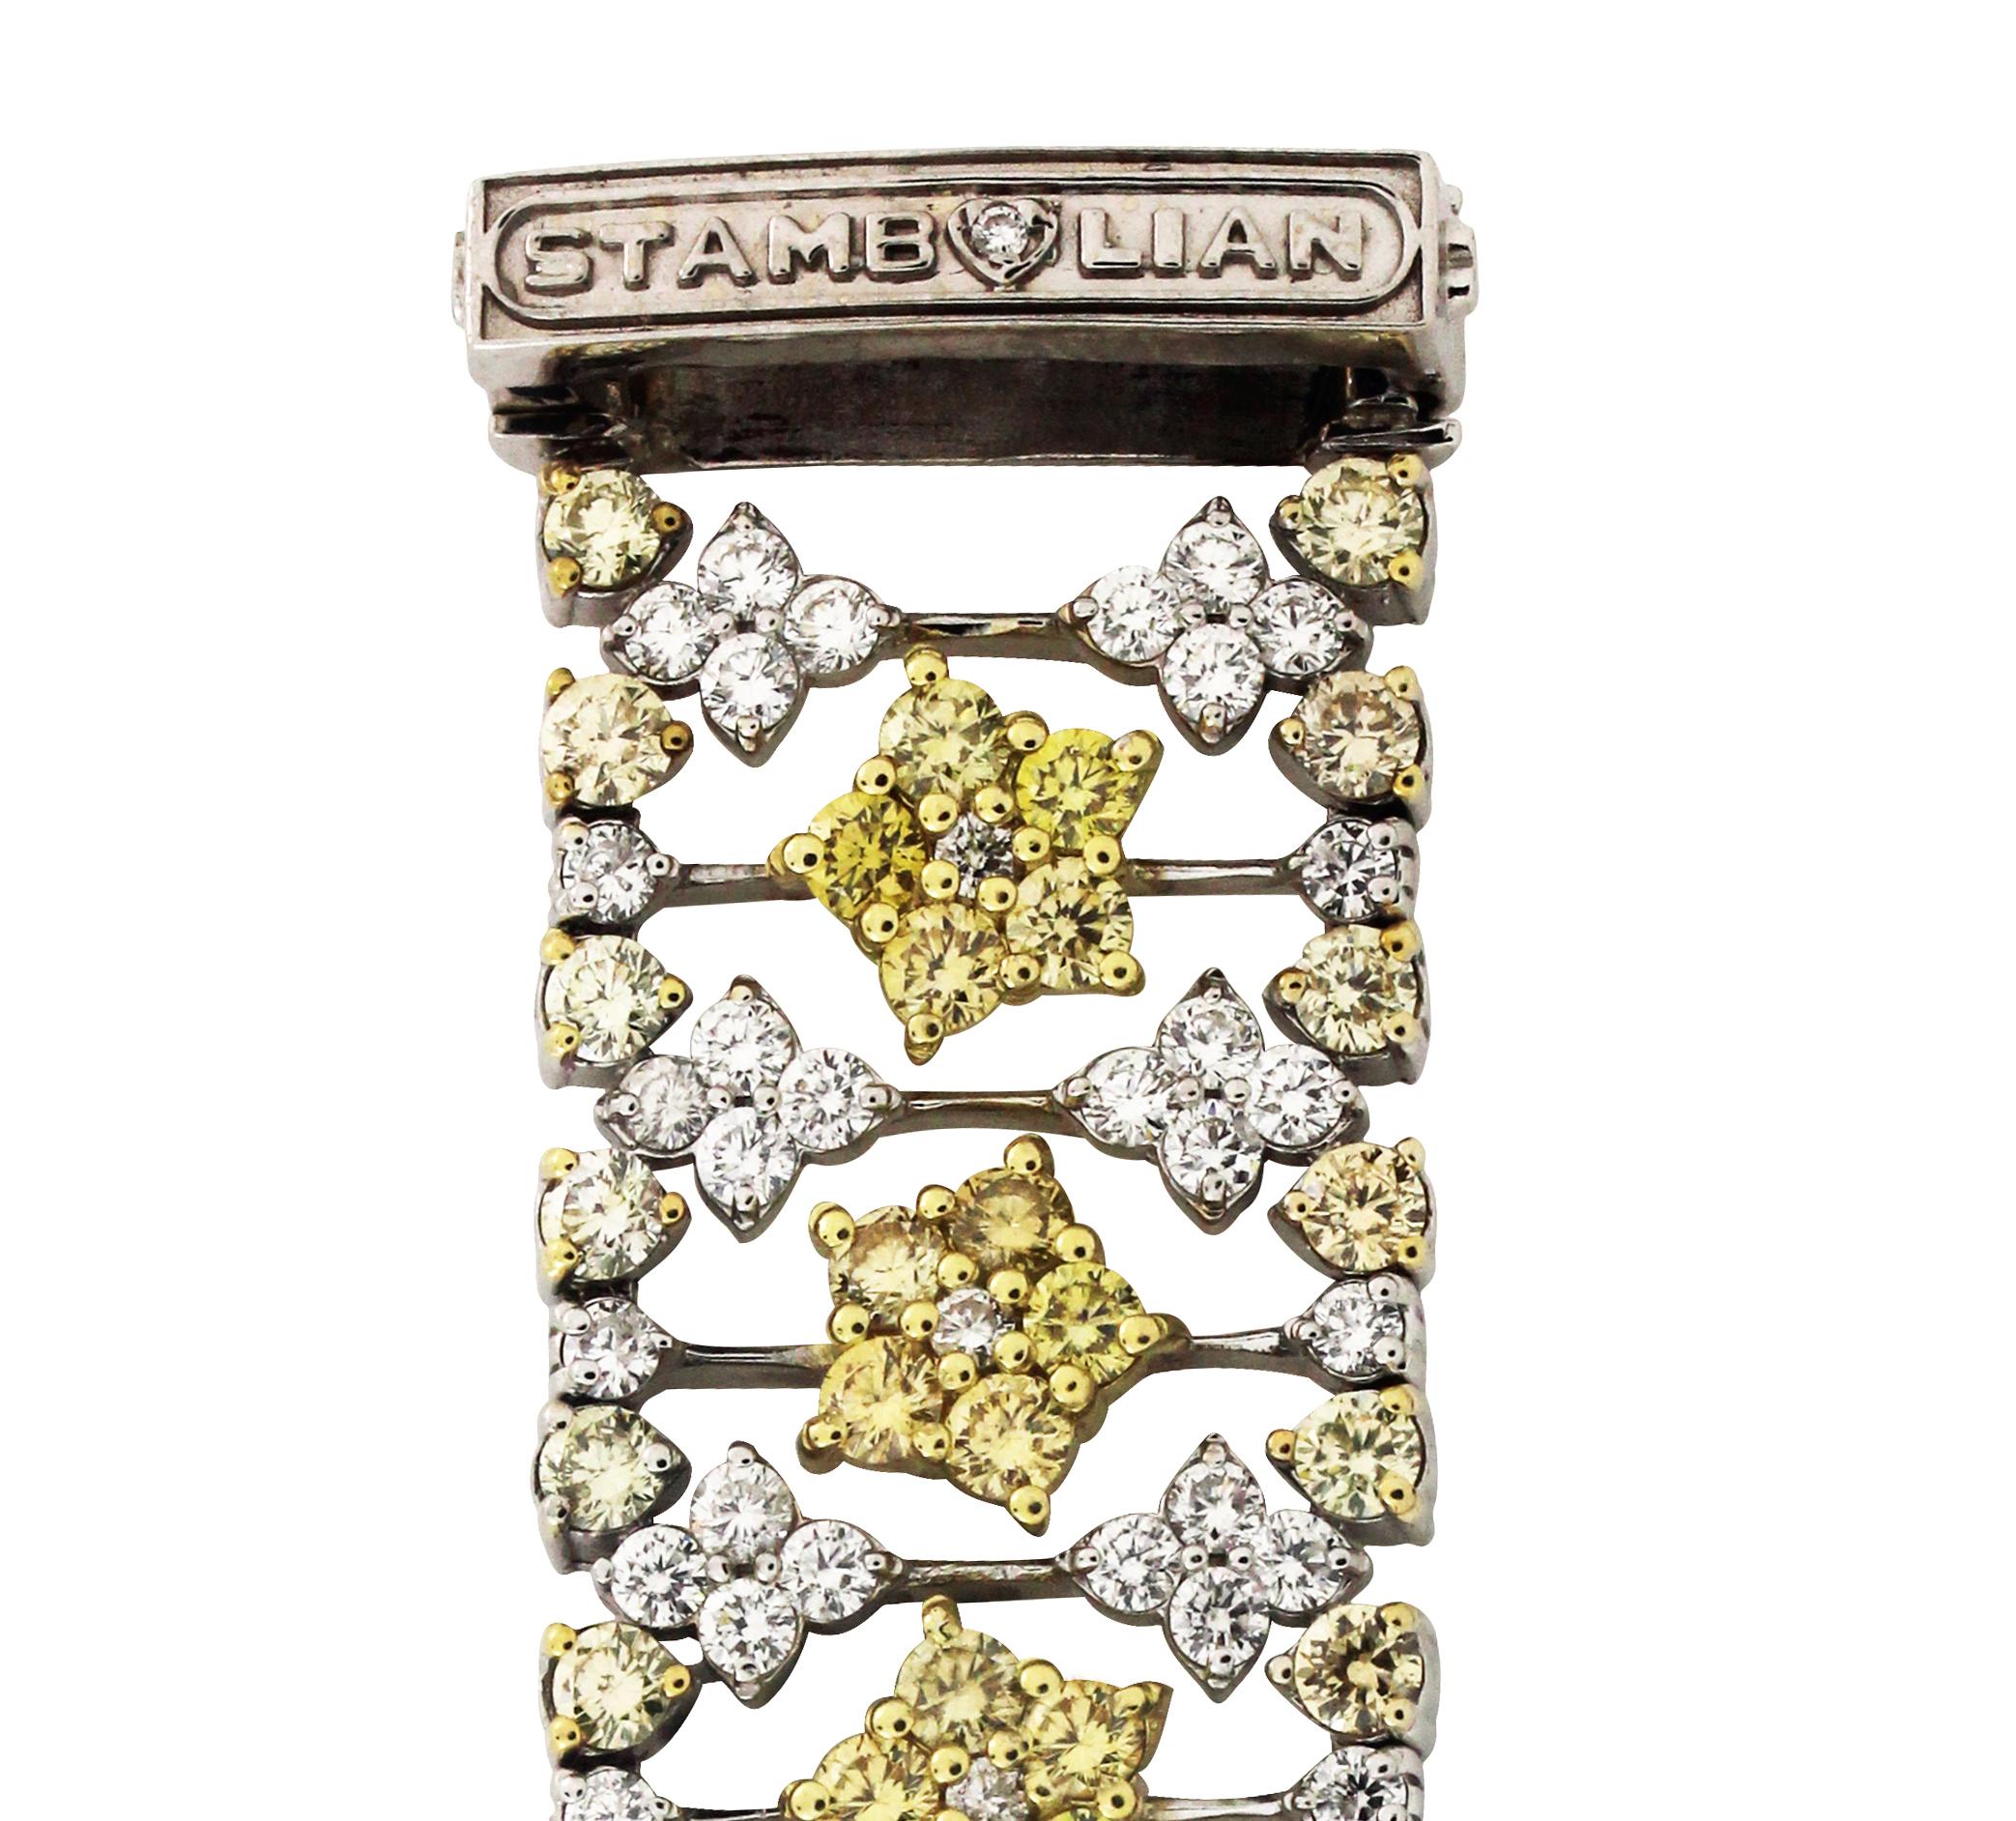 18K Two-Tone Gold Bracelet with White and Yellow Diamonds by Stambolian 

Bracelet has 7.80 carat G color, VS clarity white diamonds
12.69 carat Yellow Diamonds

Limited piece. This is one of only Three made.

Clasp is where it reads 